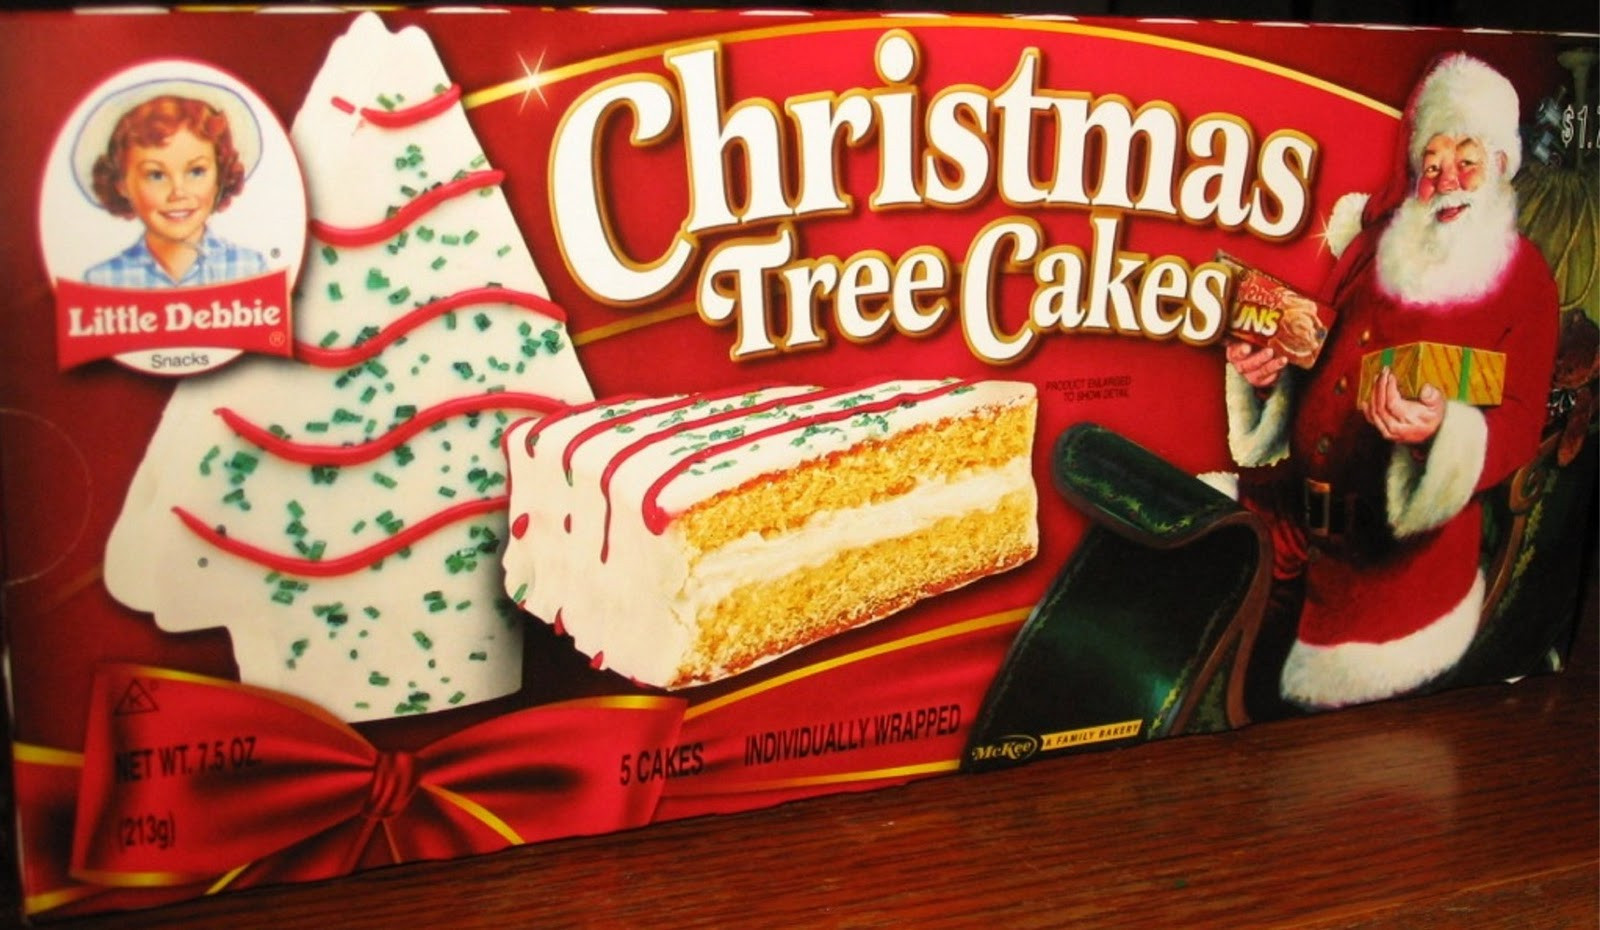 Little Debbies Christmas Tree Cakes
 The Holidaze Little Debbie Christmas Tree Cakes